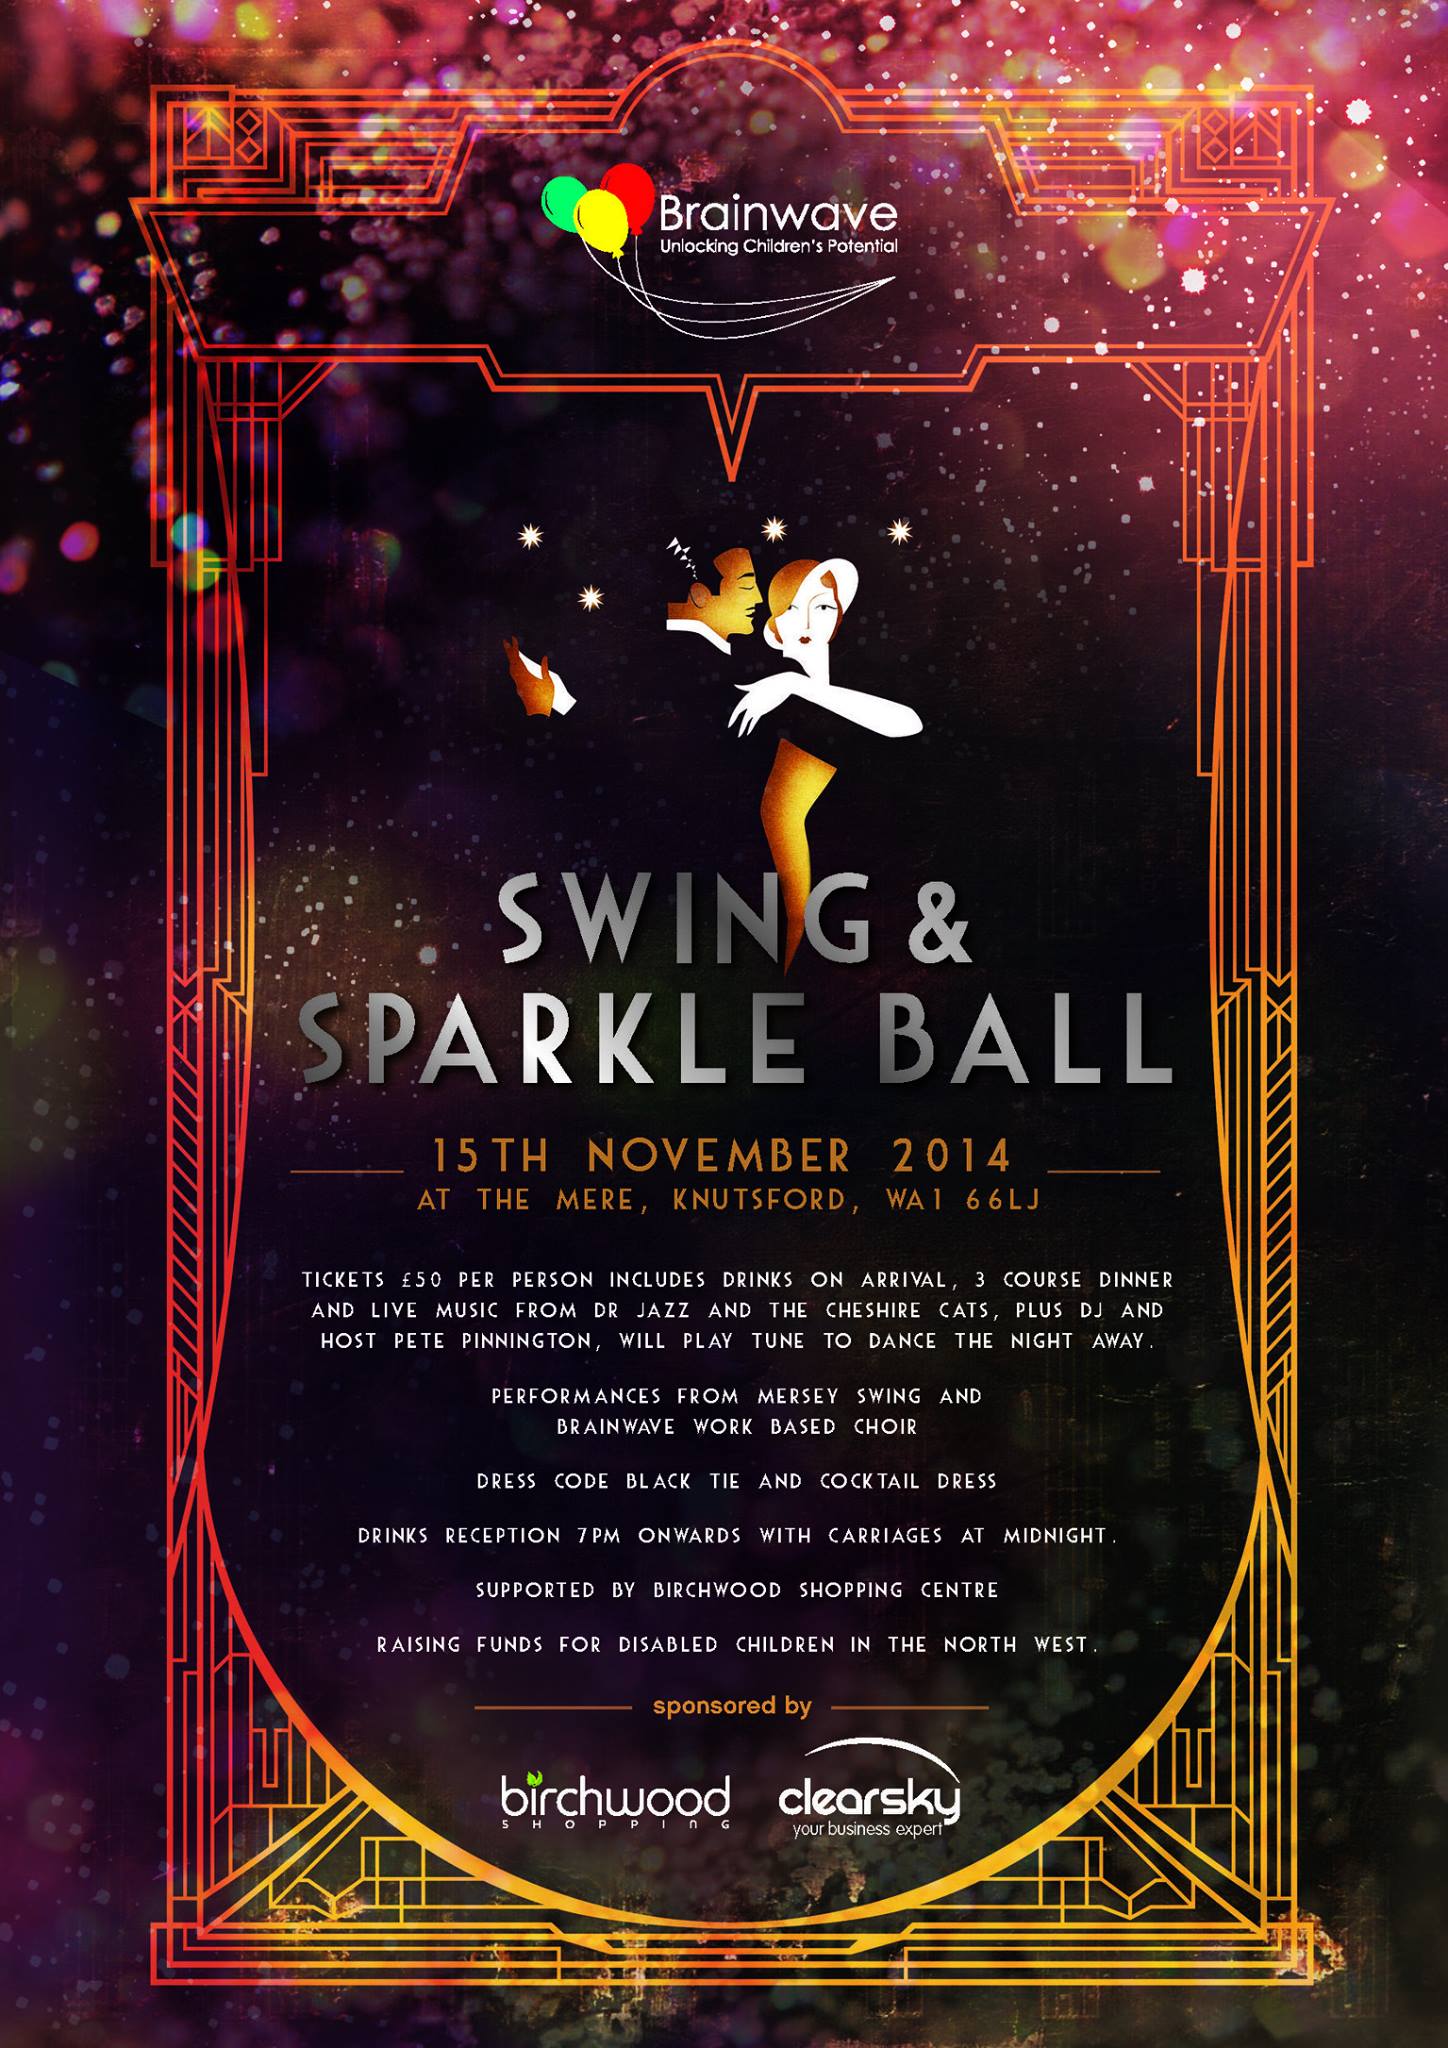 Swing and Sparkle Ball for Brainwave.